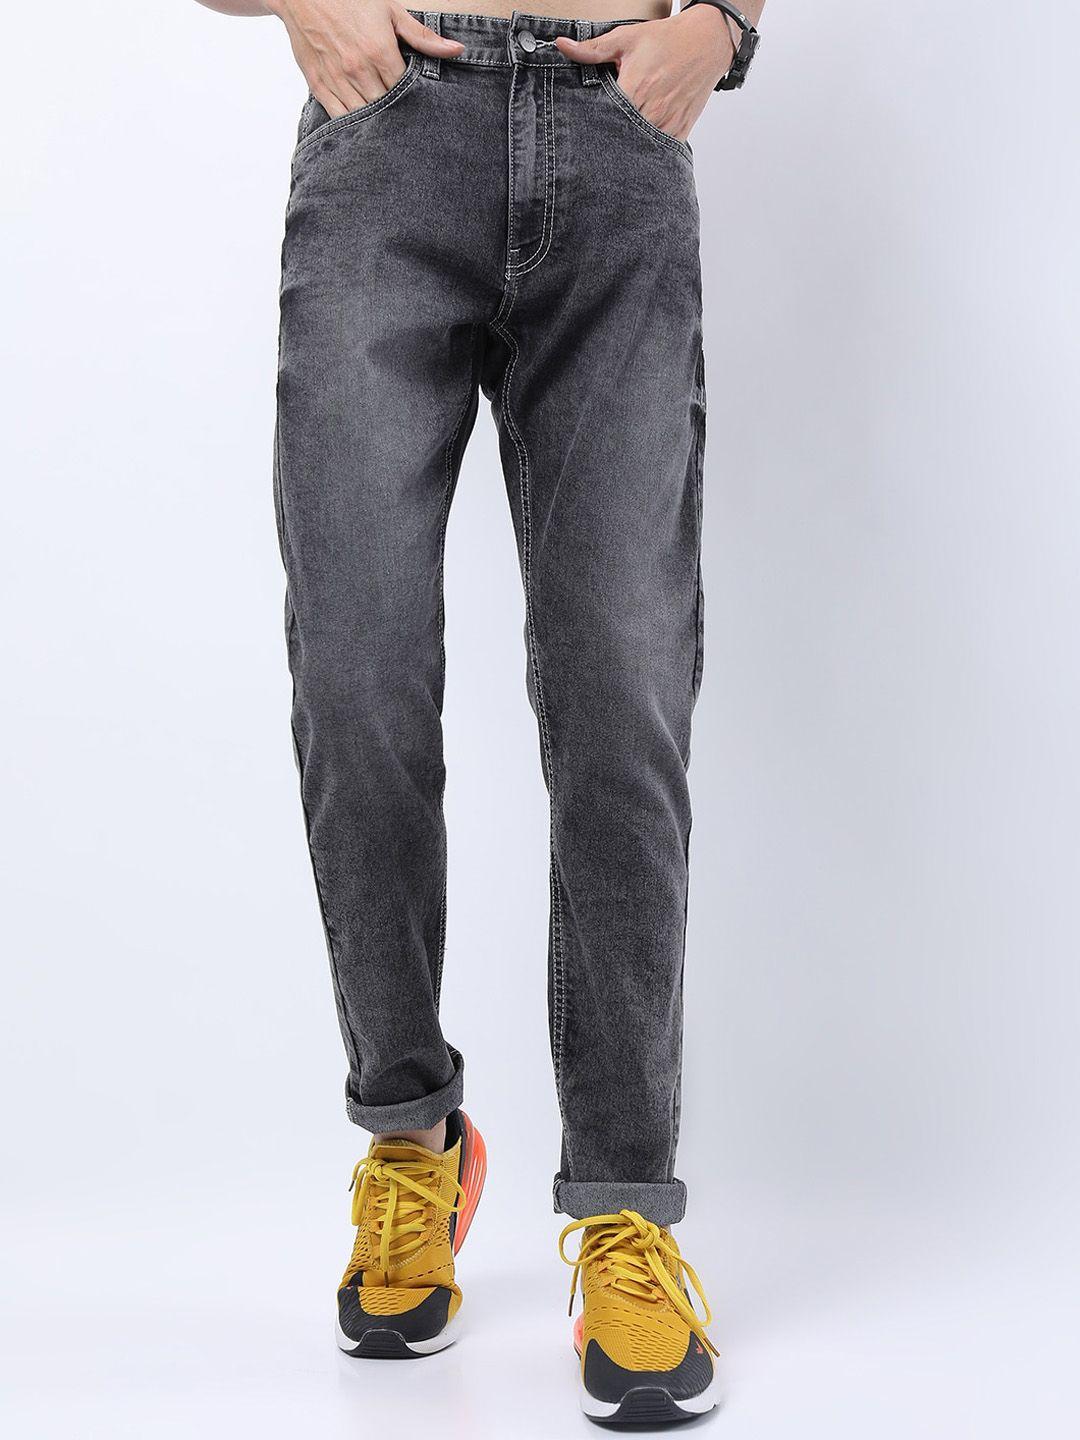 ketch-men-grey-tapered-fit-clean-look-light-fade-stretchable-jeans